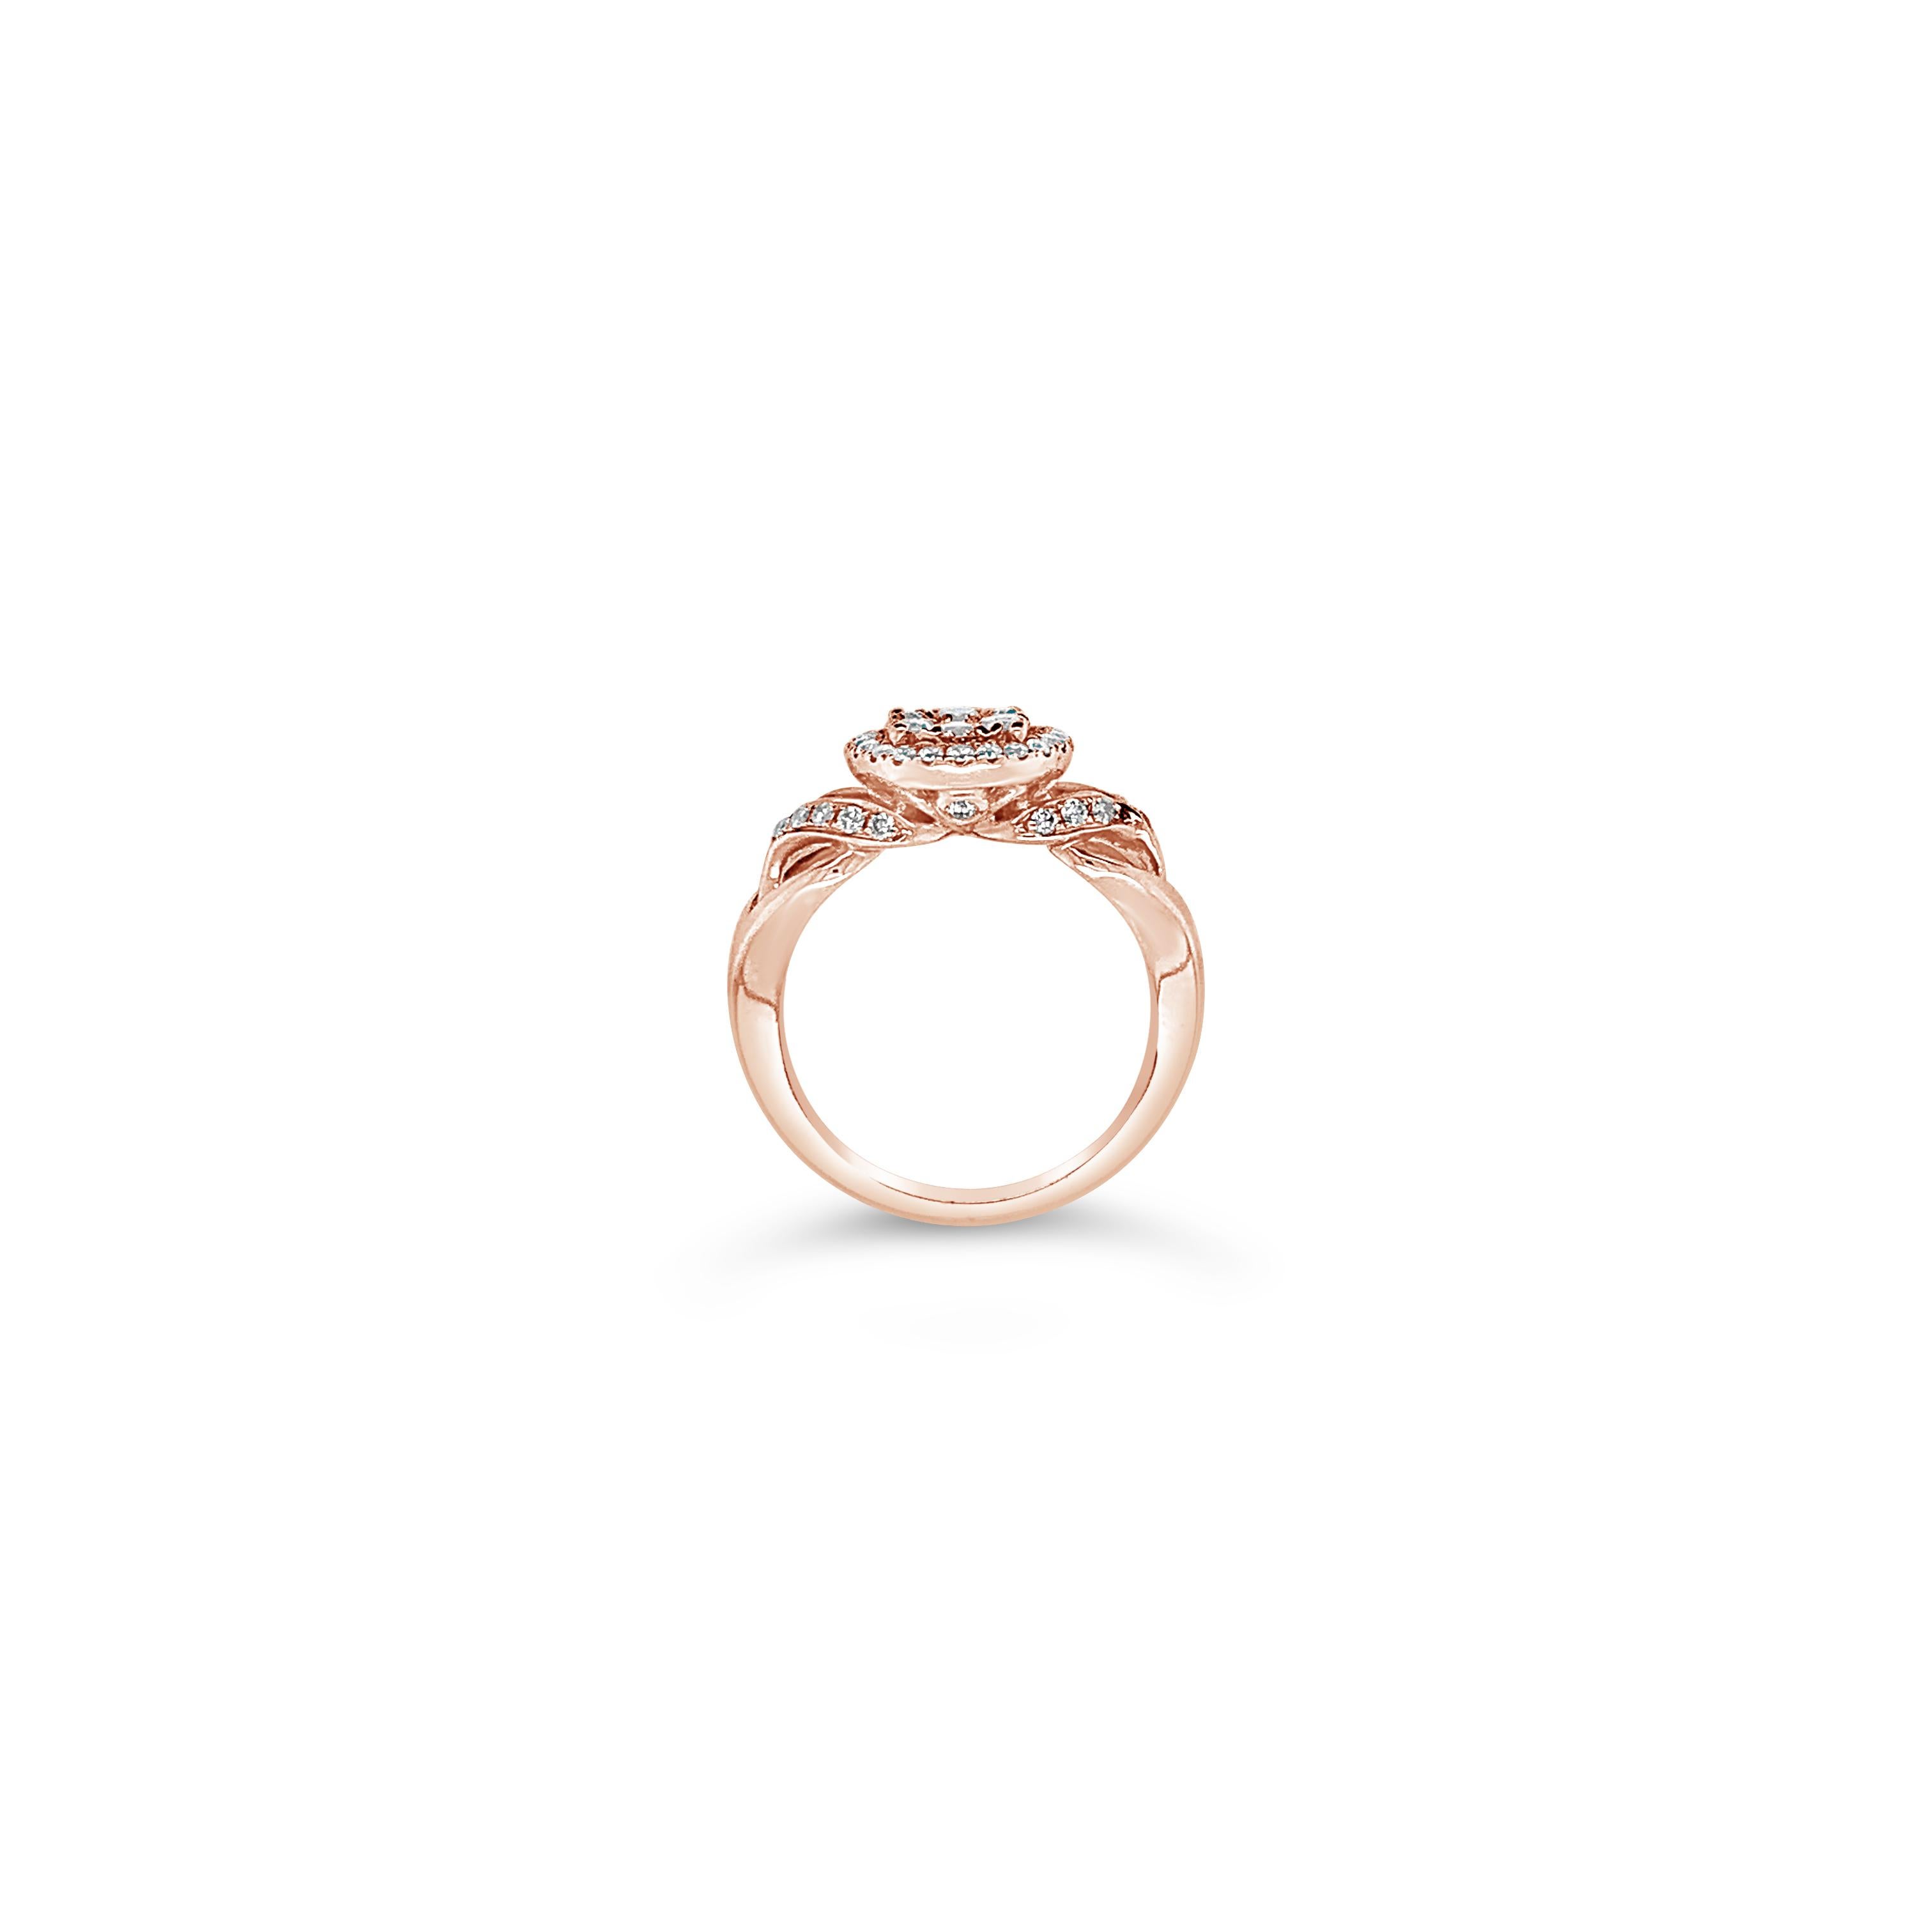 Le Vian® Ring featuring .74 cts. Vanilla Diamonds® set in 14K Strawberry Gold®

Diamonds Breakdown:
.74 cts White Diamonds

Gems Breakdown:
None

Ring may or may not be sizable, please feel free to reach out with any questions!

Item comes with a Le